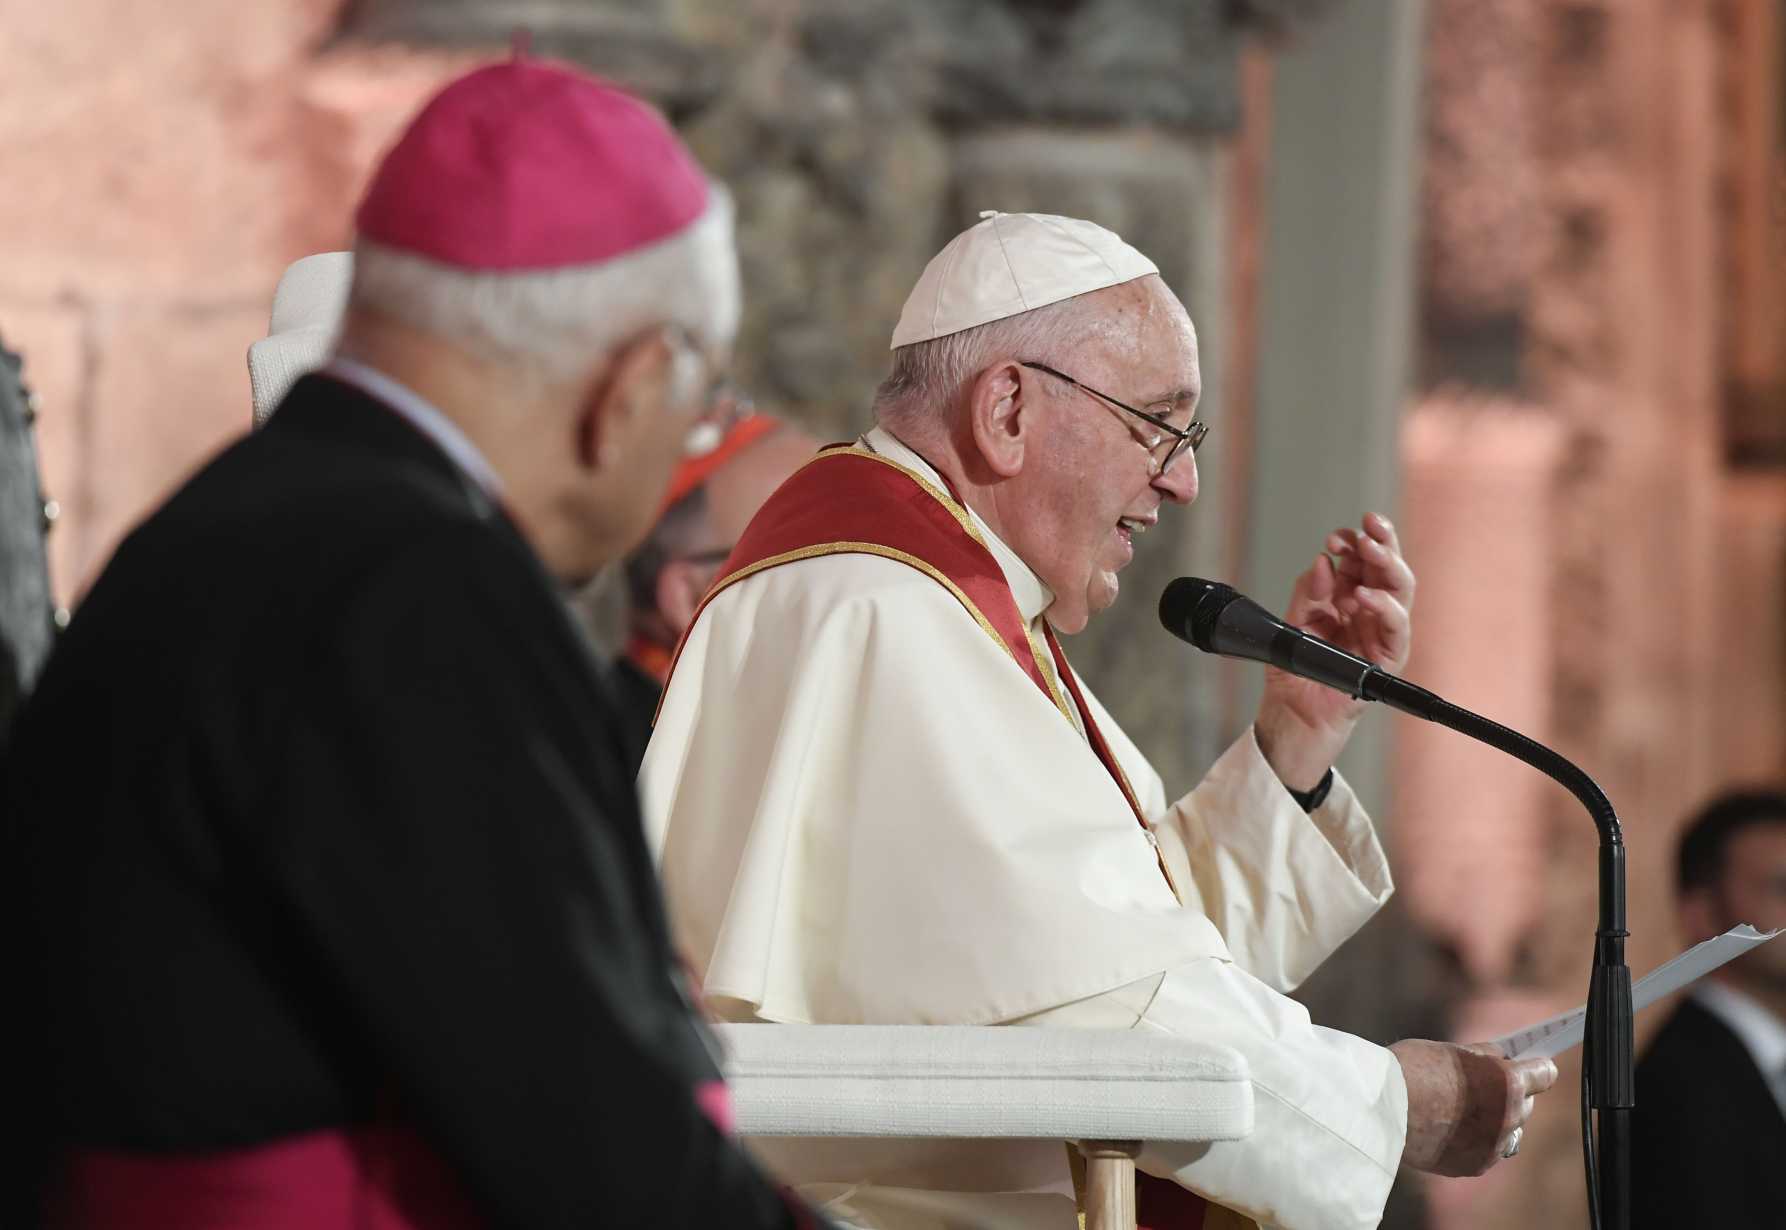 Awaken the 'weary' church by becoming 'restless,' pope says in Portugal